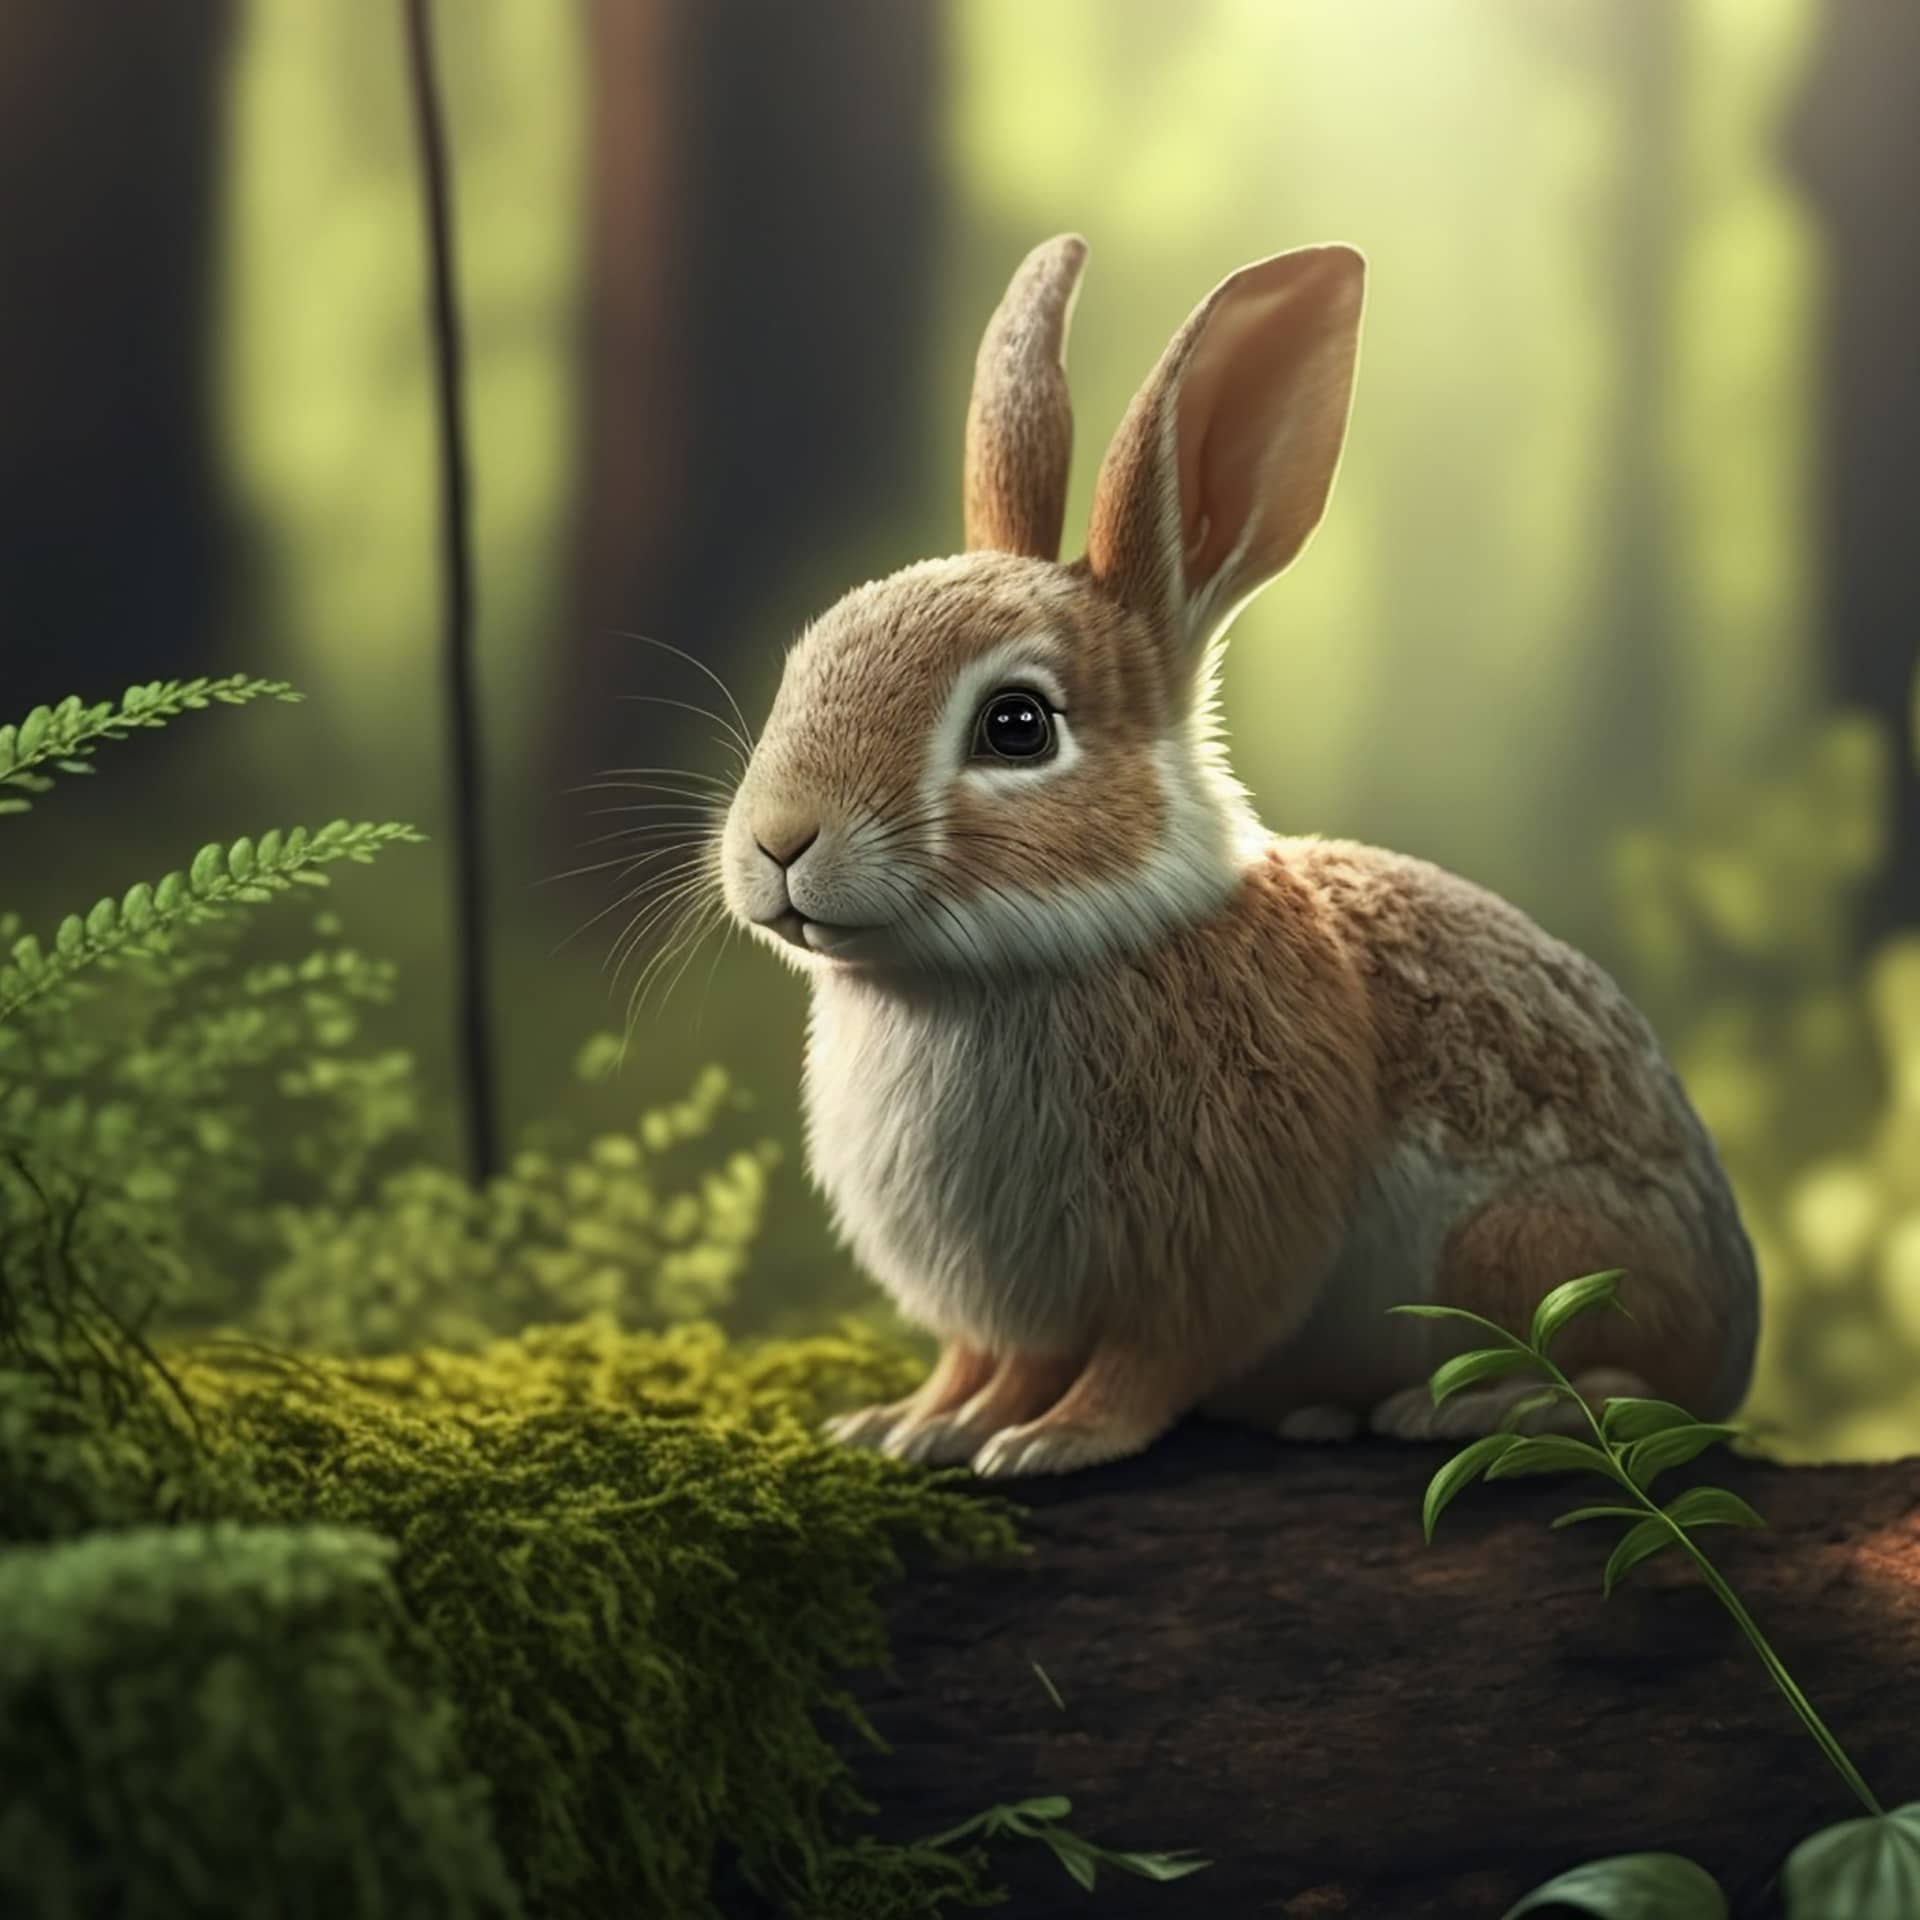 Cute little bunny forest animal profile pictures